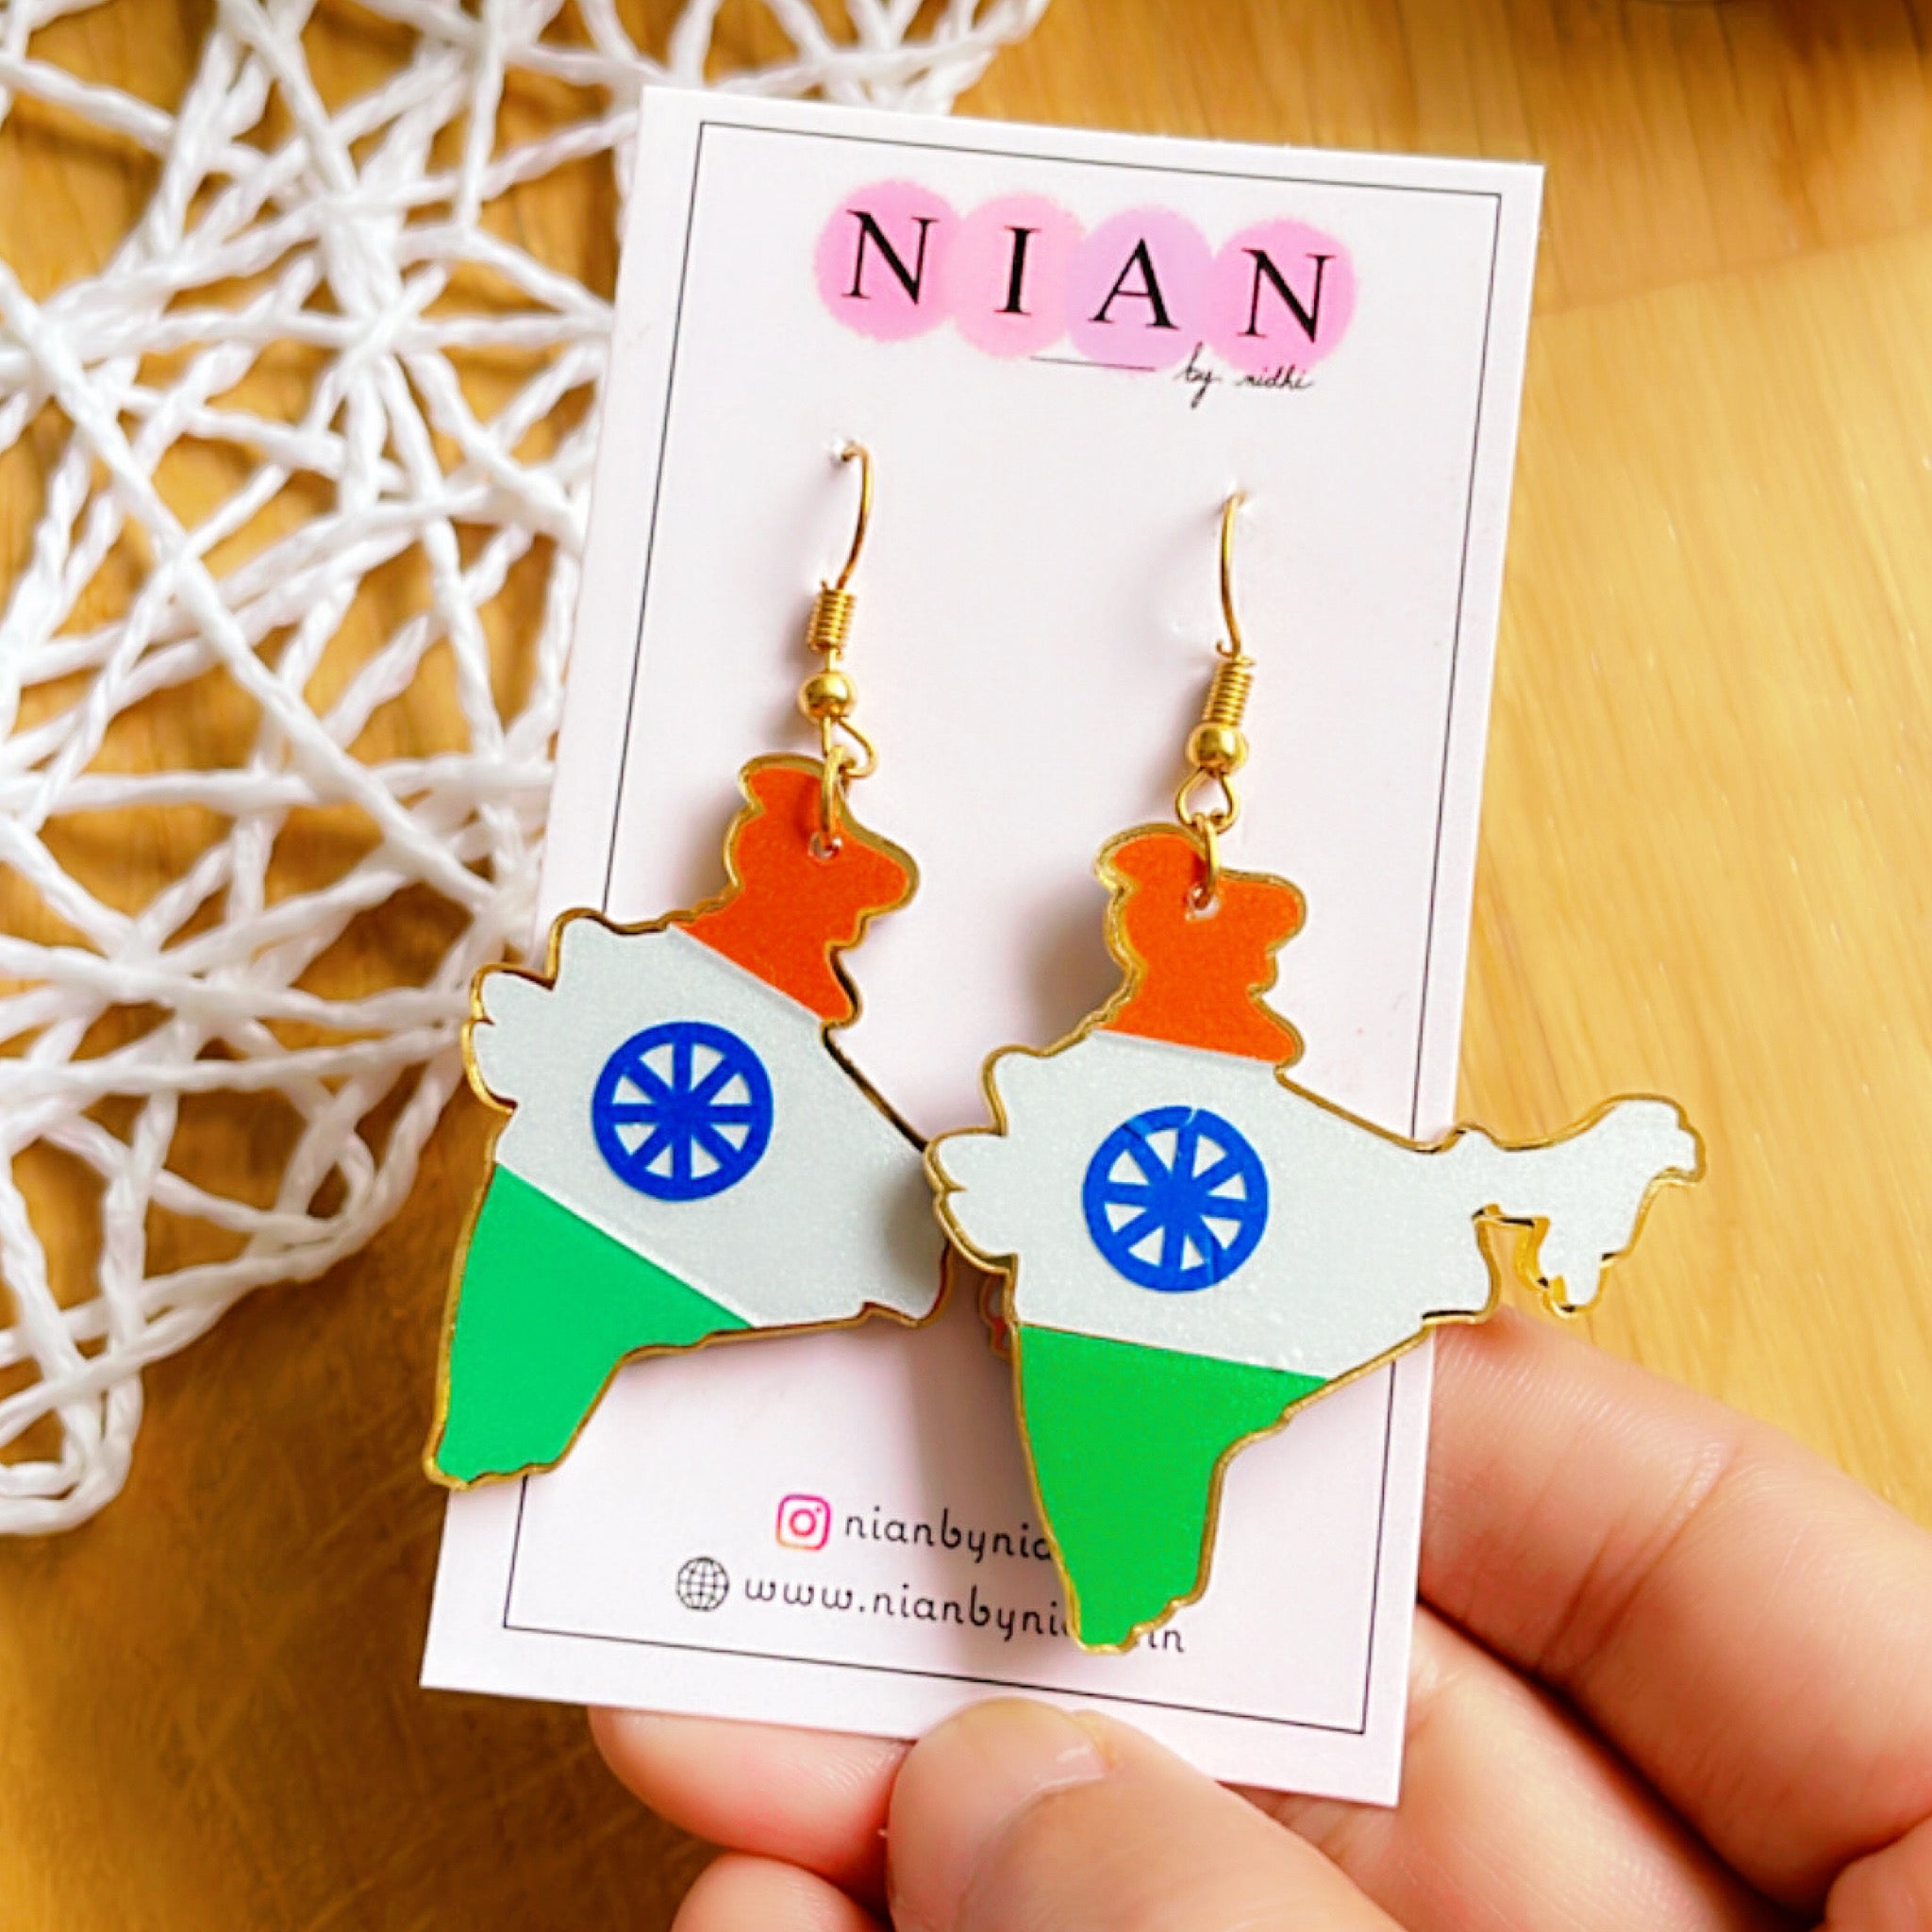 Jai Hind Earrings - Saffron, White and Green - Nian by Nidhi, placed in a brown and white background